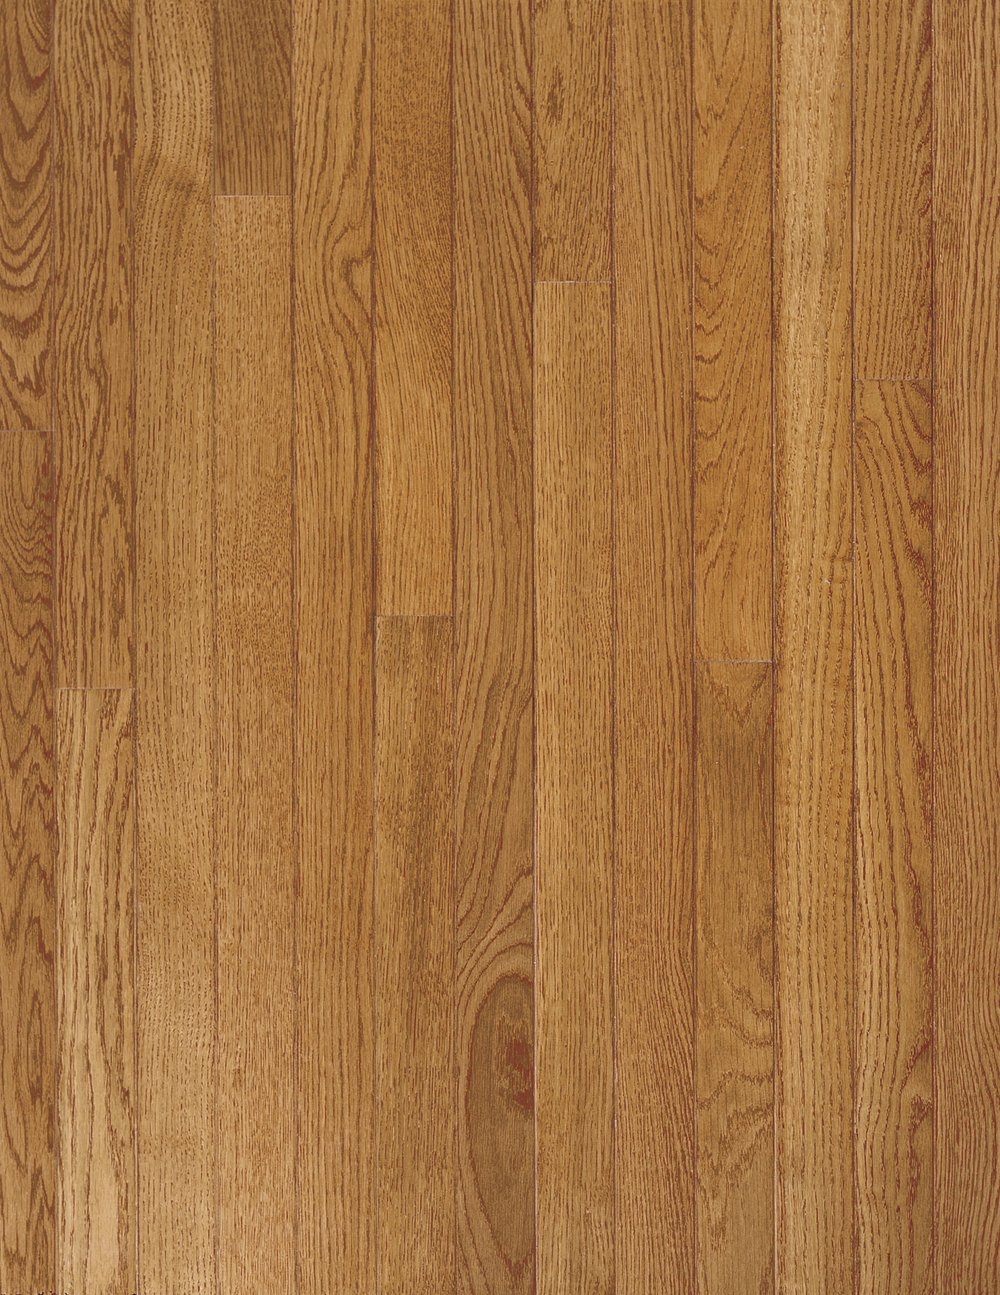 Fawn Oak 2 1/4" - Fulton LOW GLOSS Collection - Solid Hardwood Flooring by Bruce